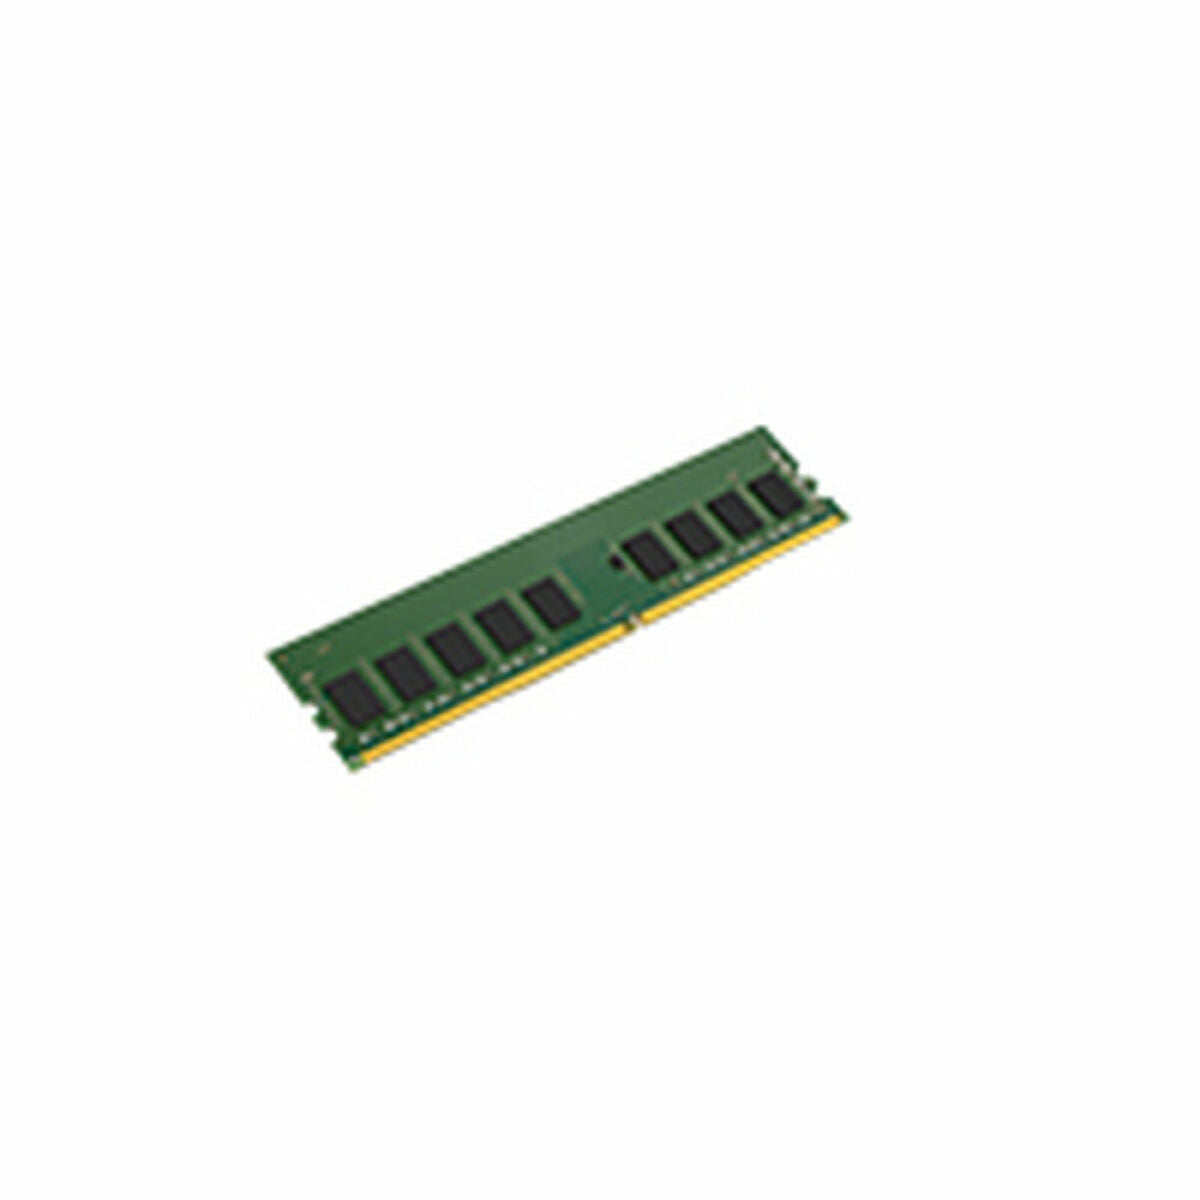 RAM Memory Kingston KTD-PE426E/16G       DDR4 16 GB, Kingston, Computing, Components, ram-memory-kingston-ktd-pe426e-16g-ddr4-16-gb, Brand_Kingston, category-reference-2609, category-reference-2803, category-reference-2807, category-reference-t-19685, category-reference-t-19912, category-reference-t-21360, computers / components, Condition_NEW, Price_50 - 100, Teleworking, RiotNook